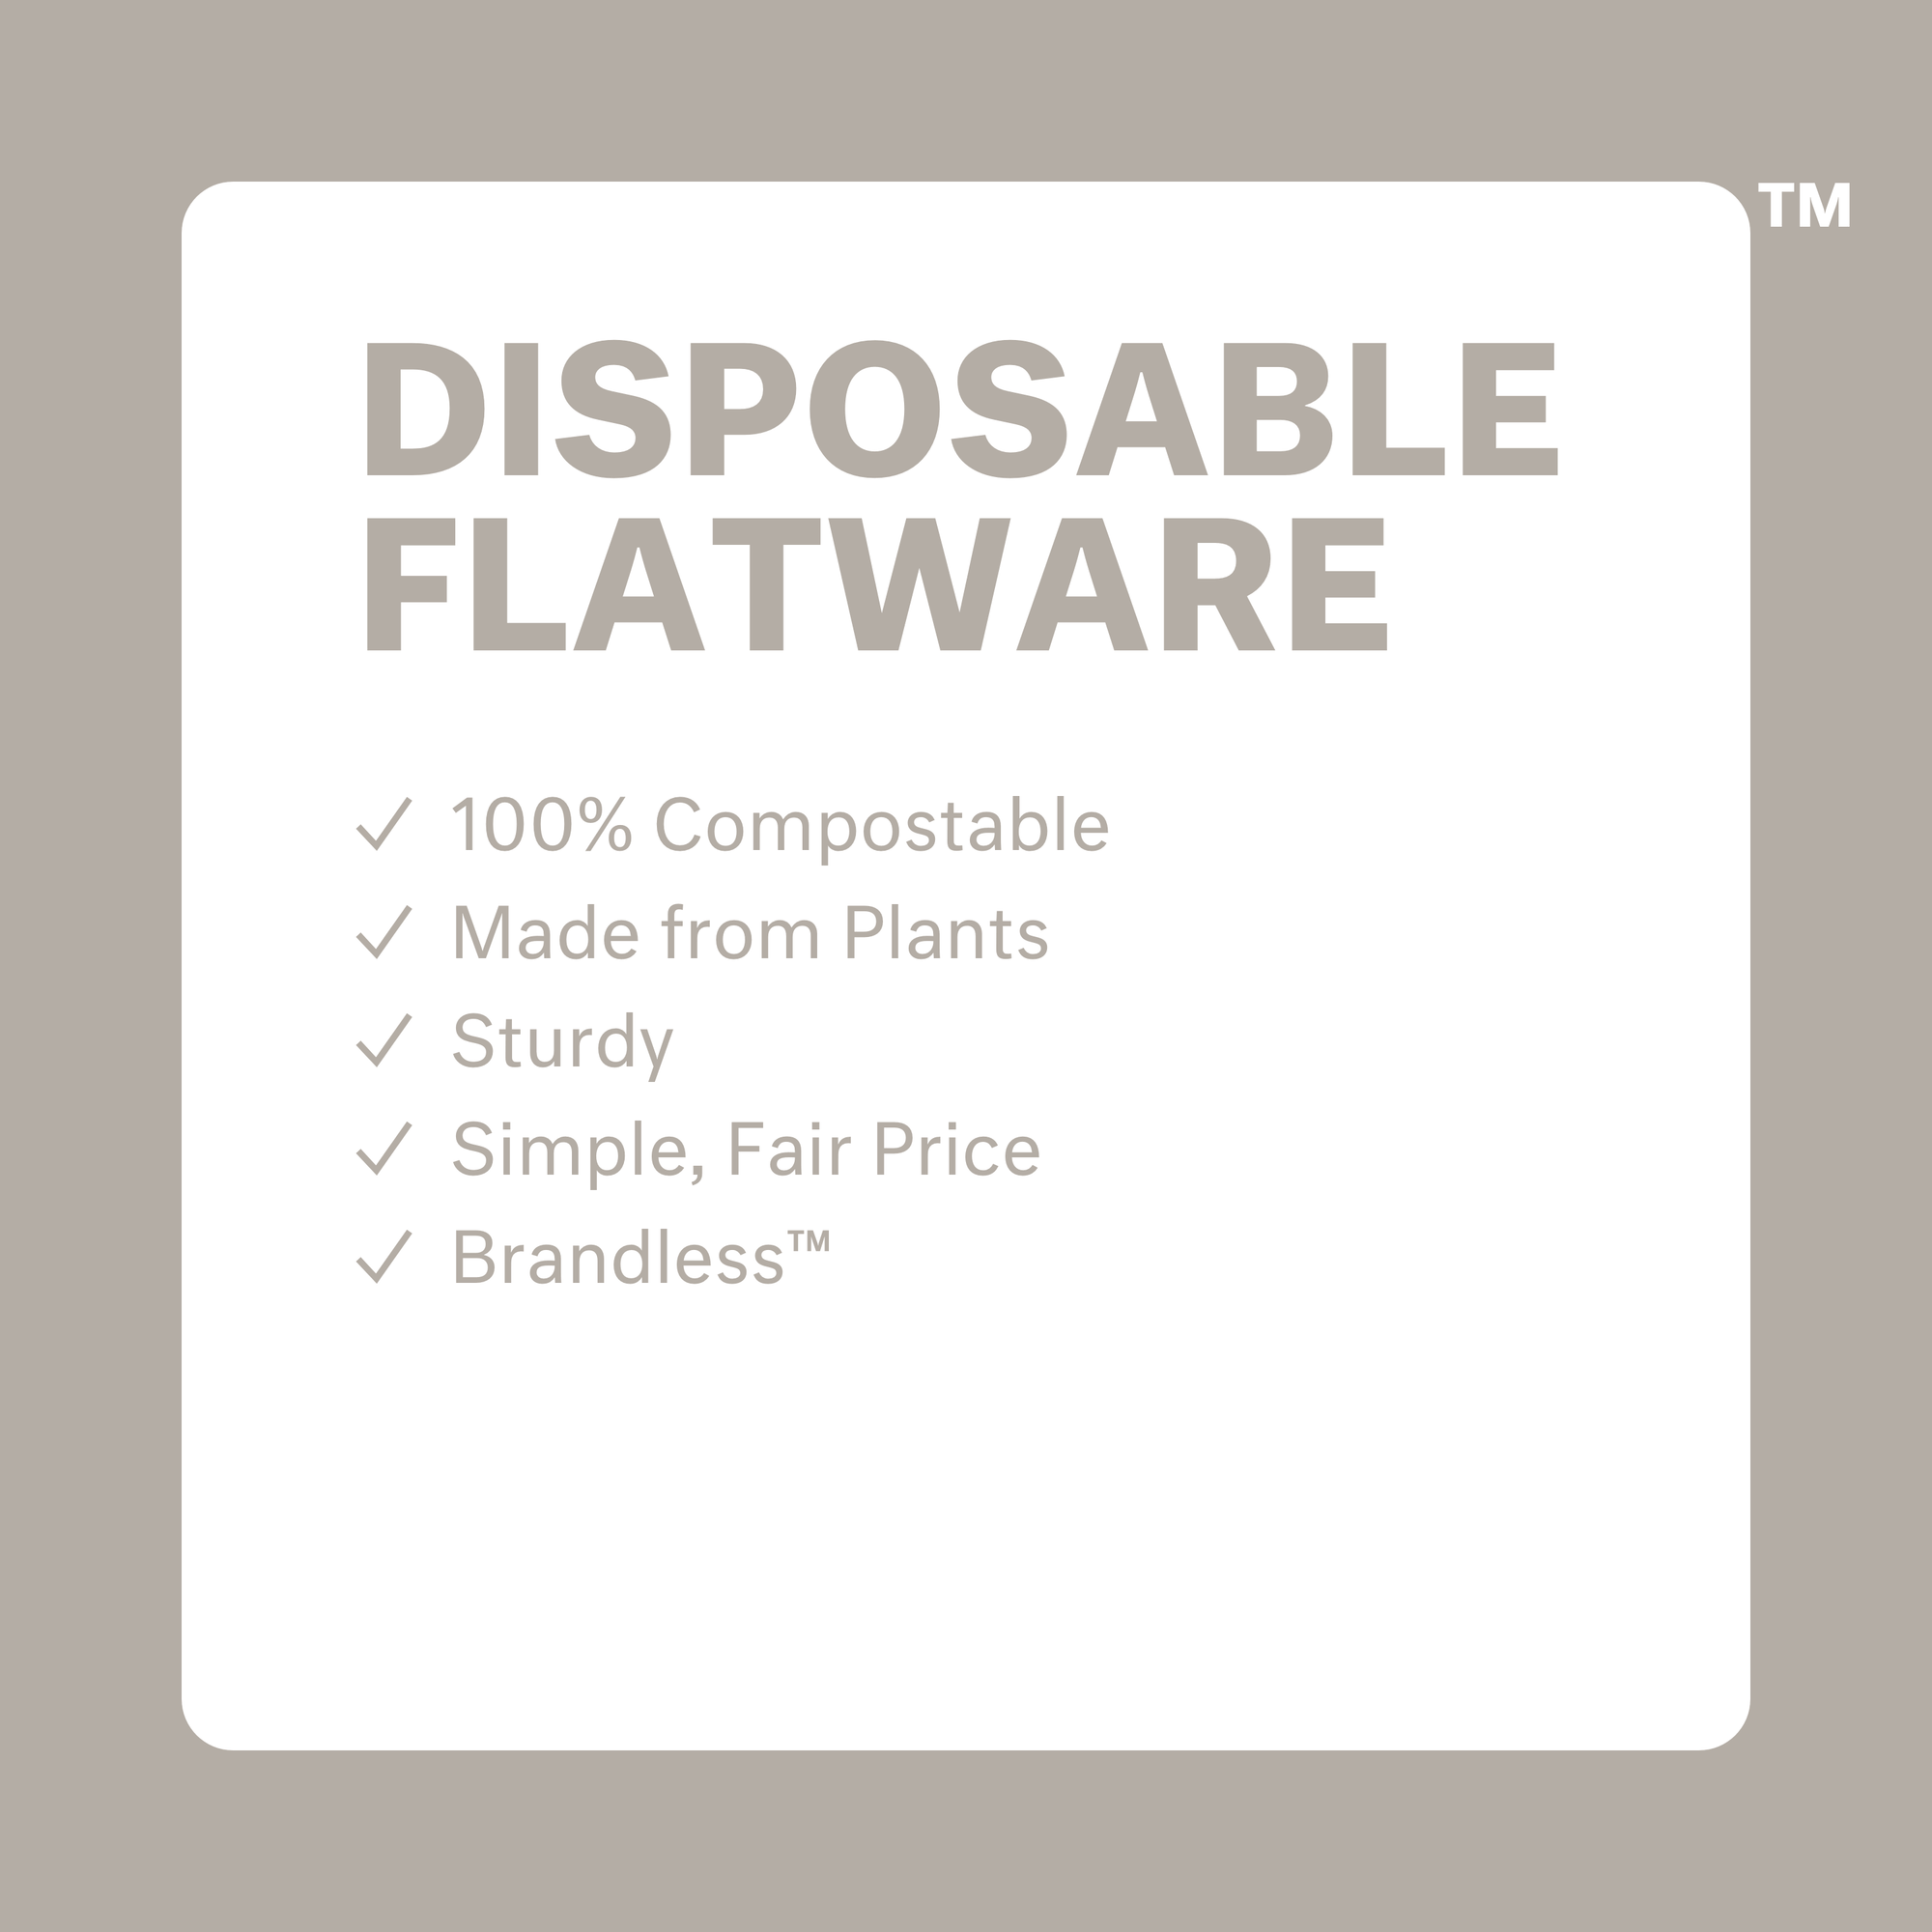 Disposable flatware: 100% compostable, made from plants, brandless.  24 count: 8 spoons, 8 knives, 8 forks.